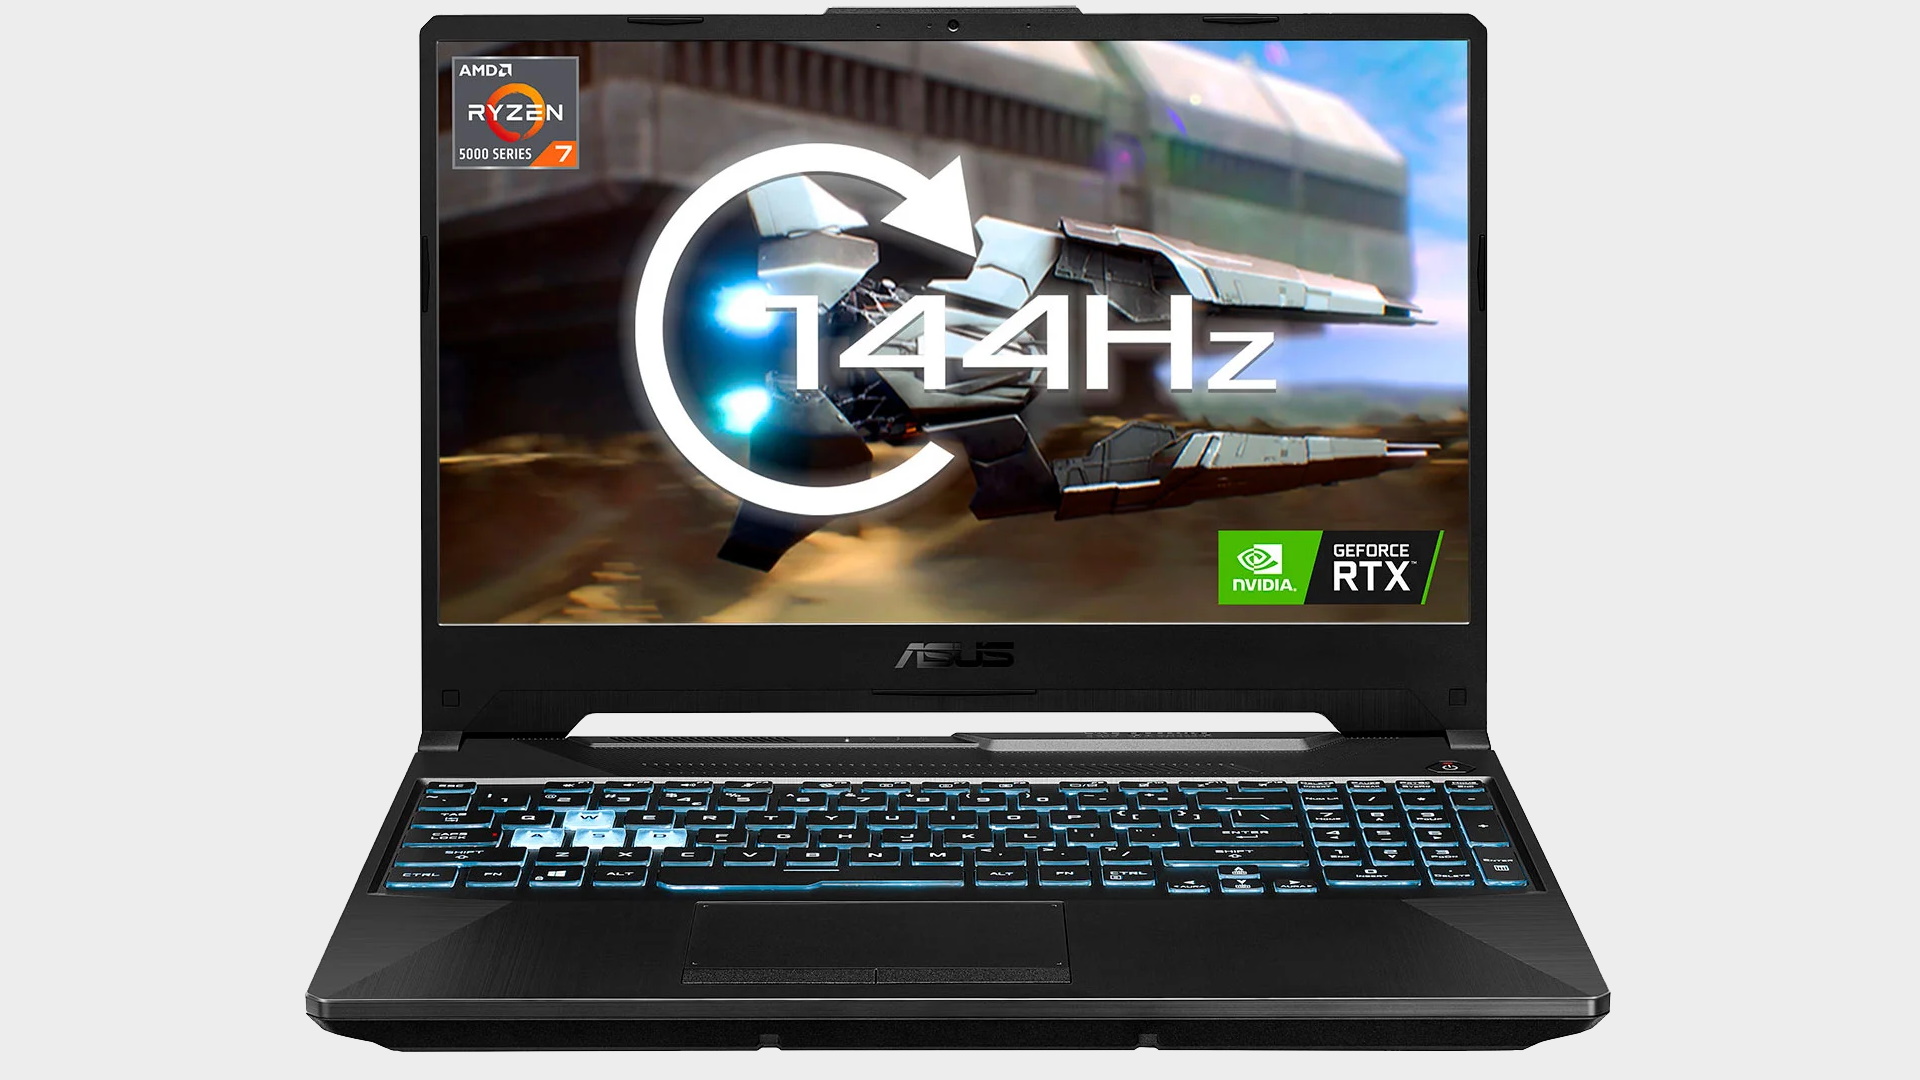  Best gaming laptop deal today: This laptop is packing an RTX 3060 for just £999 